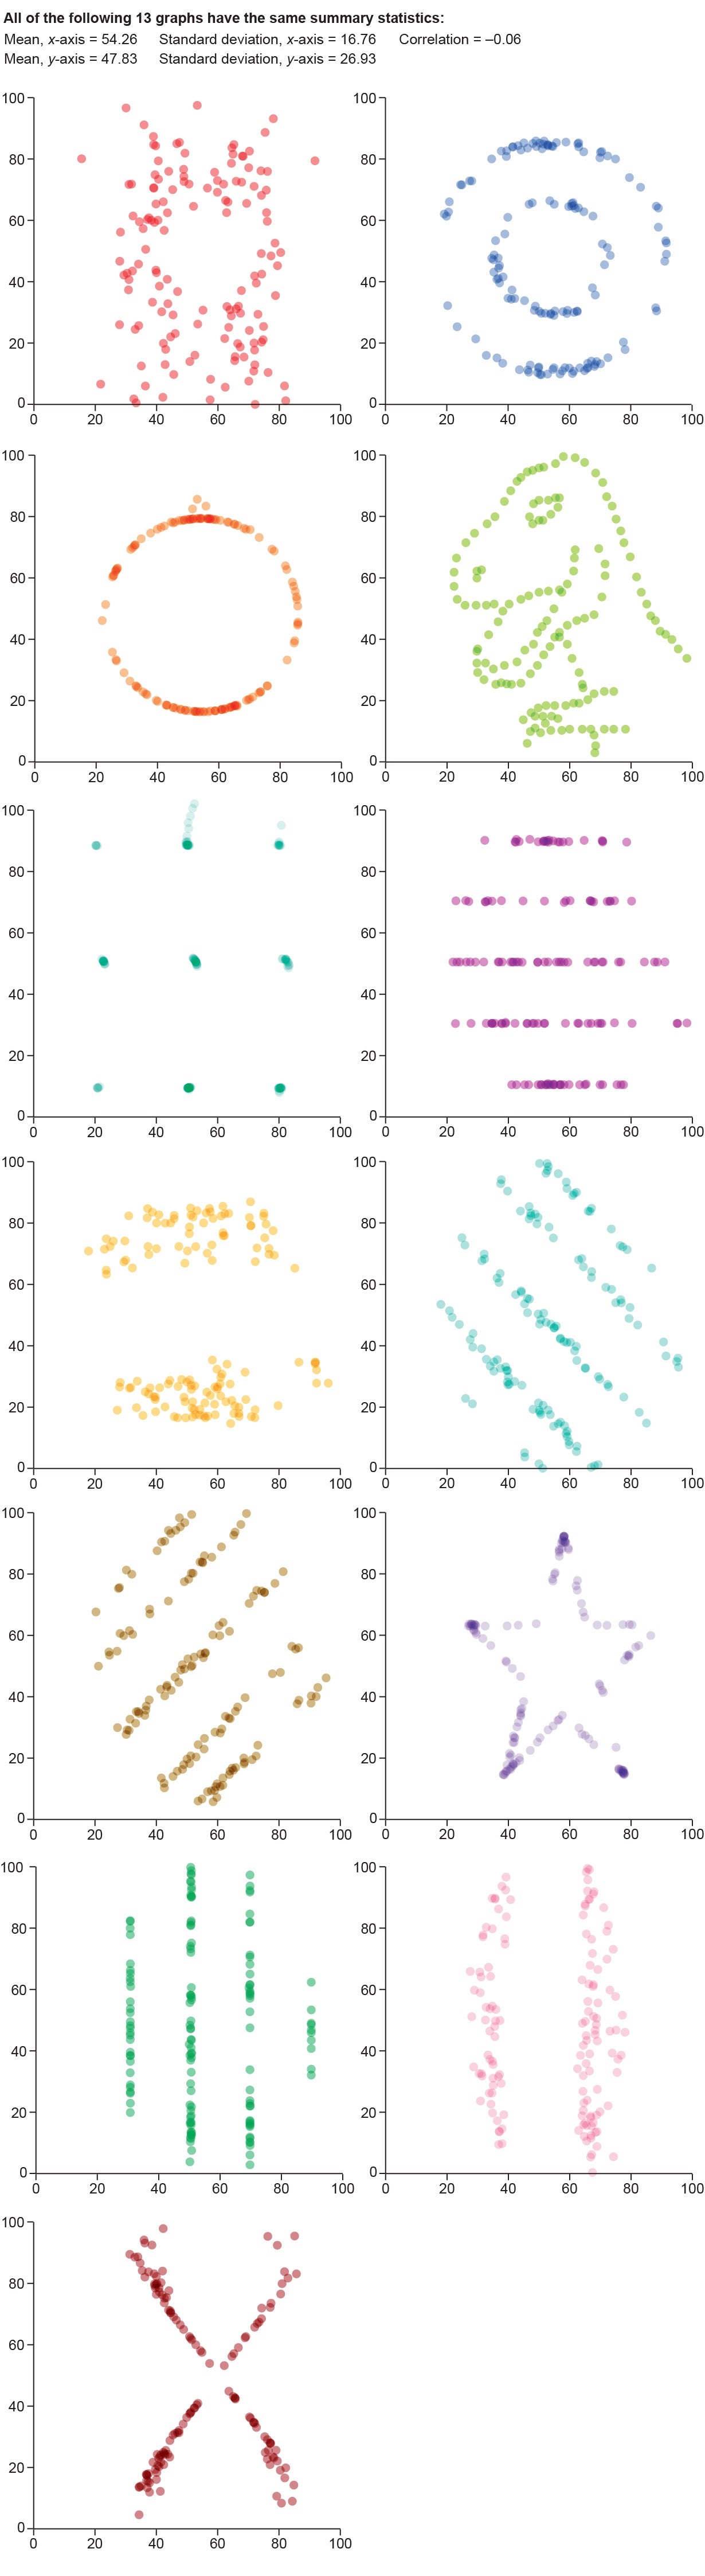 Thirteen scatter plots with the same summary statistics show significantly distinct arrangements of 141 data points, including cases where the points are arranged in a circle, a star, the letter X, and a drawing of a T. rex.